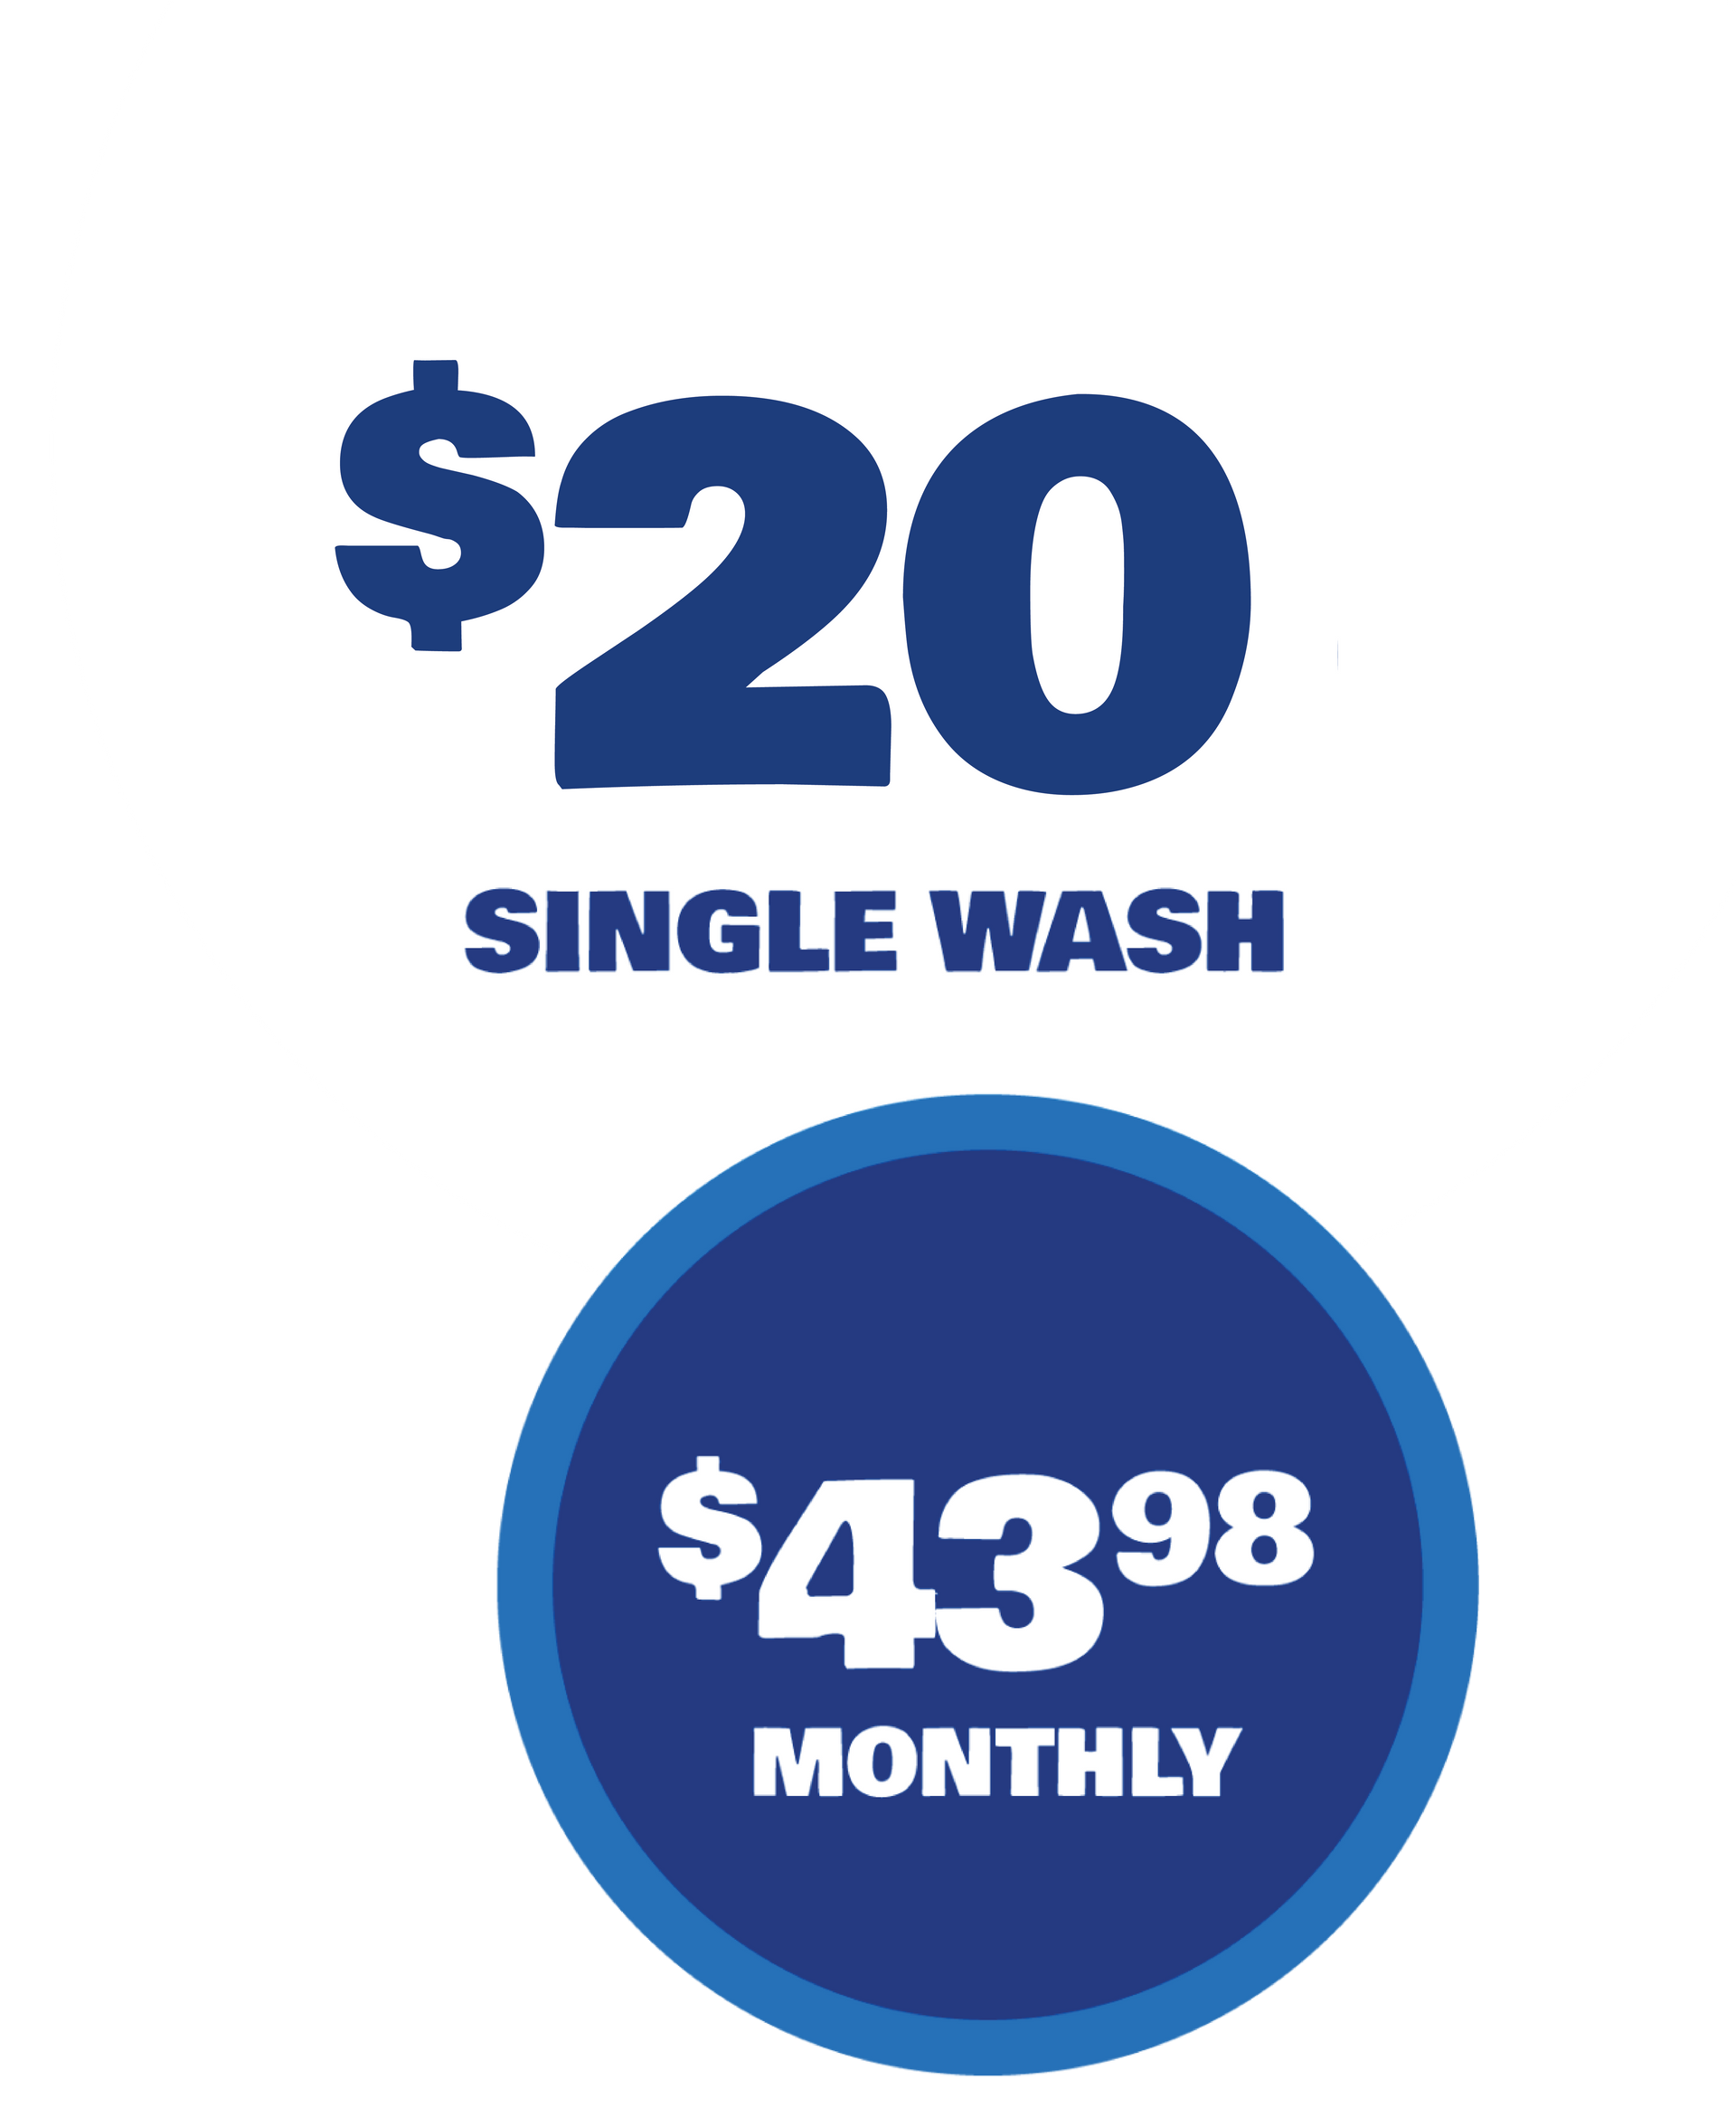 a sign that says $ 20 single wash and $ 43.98 monthly